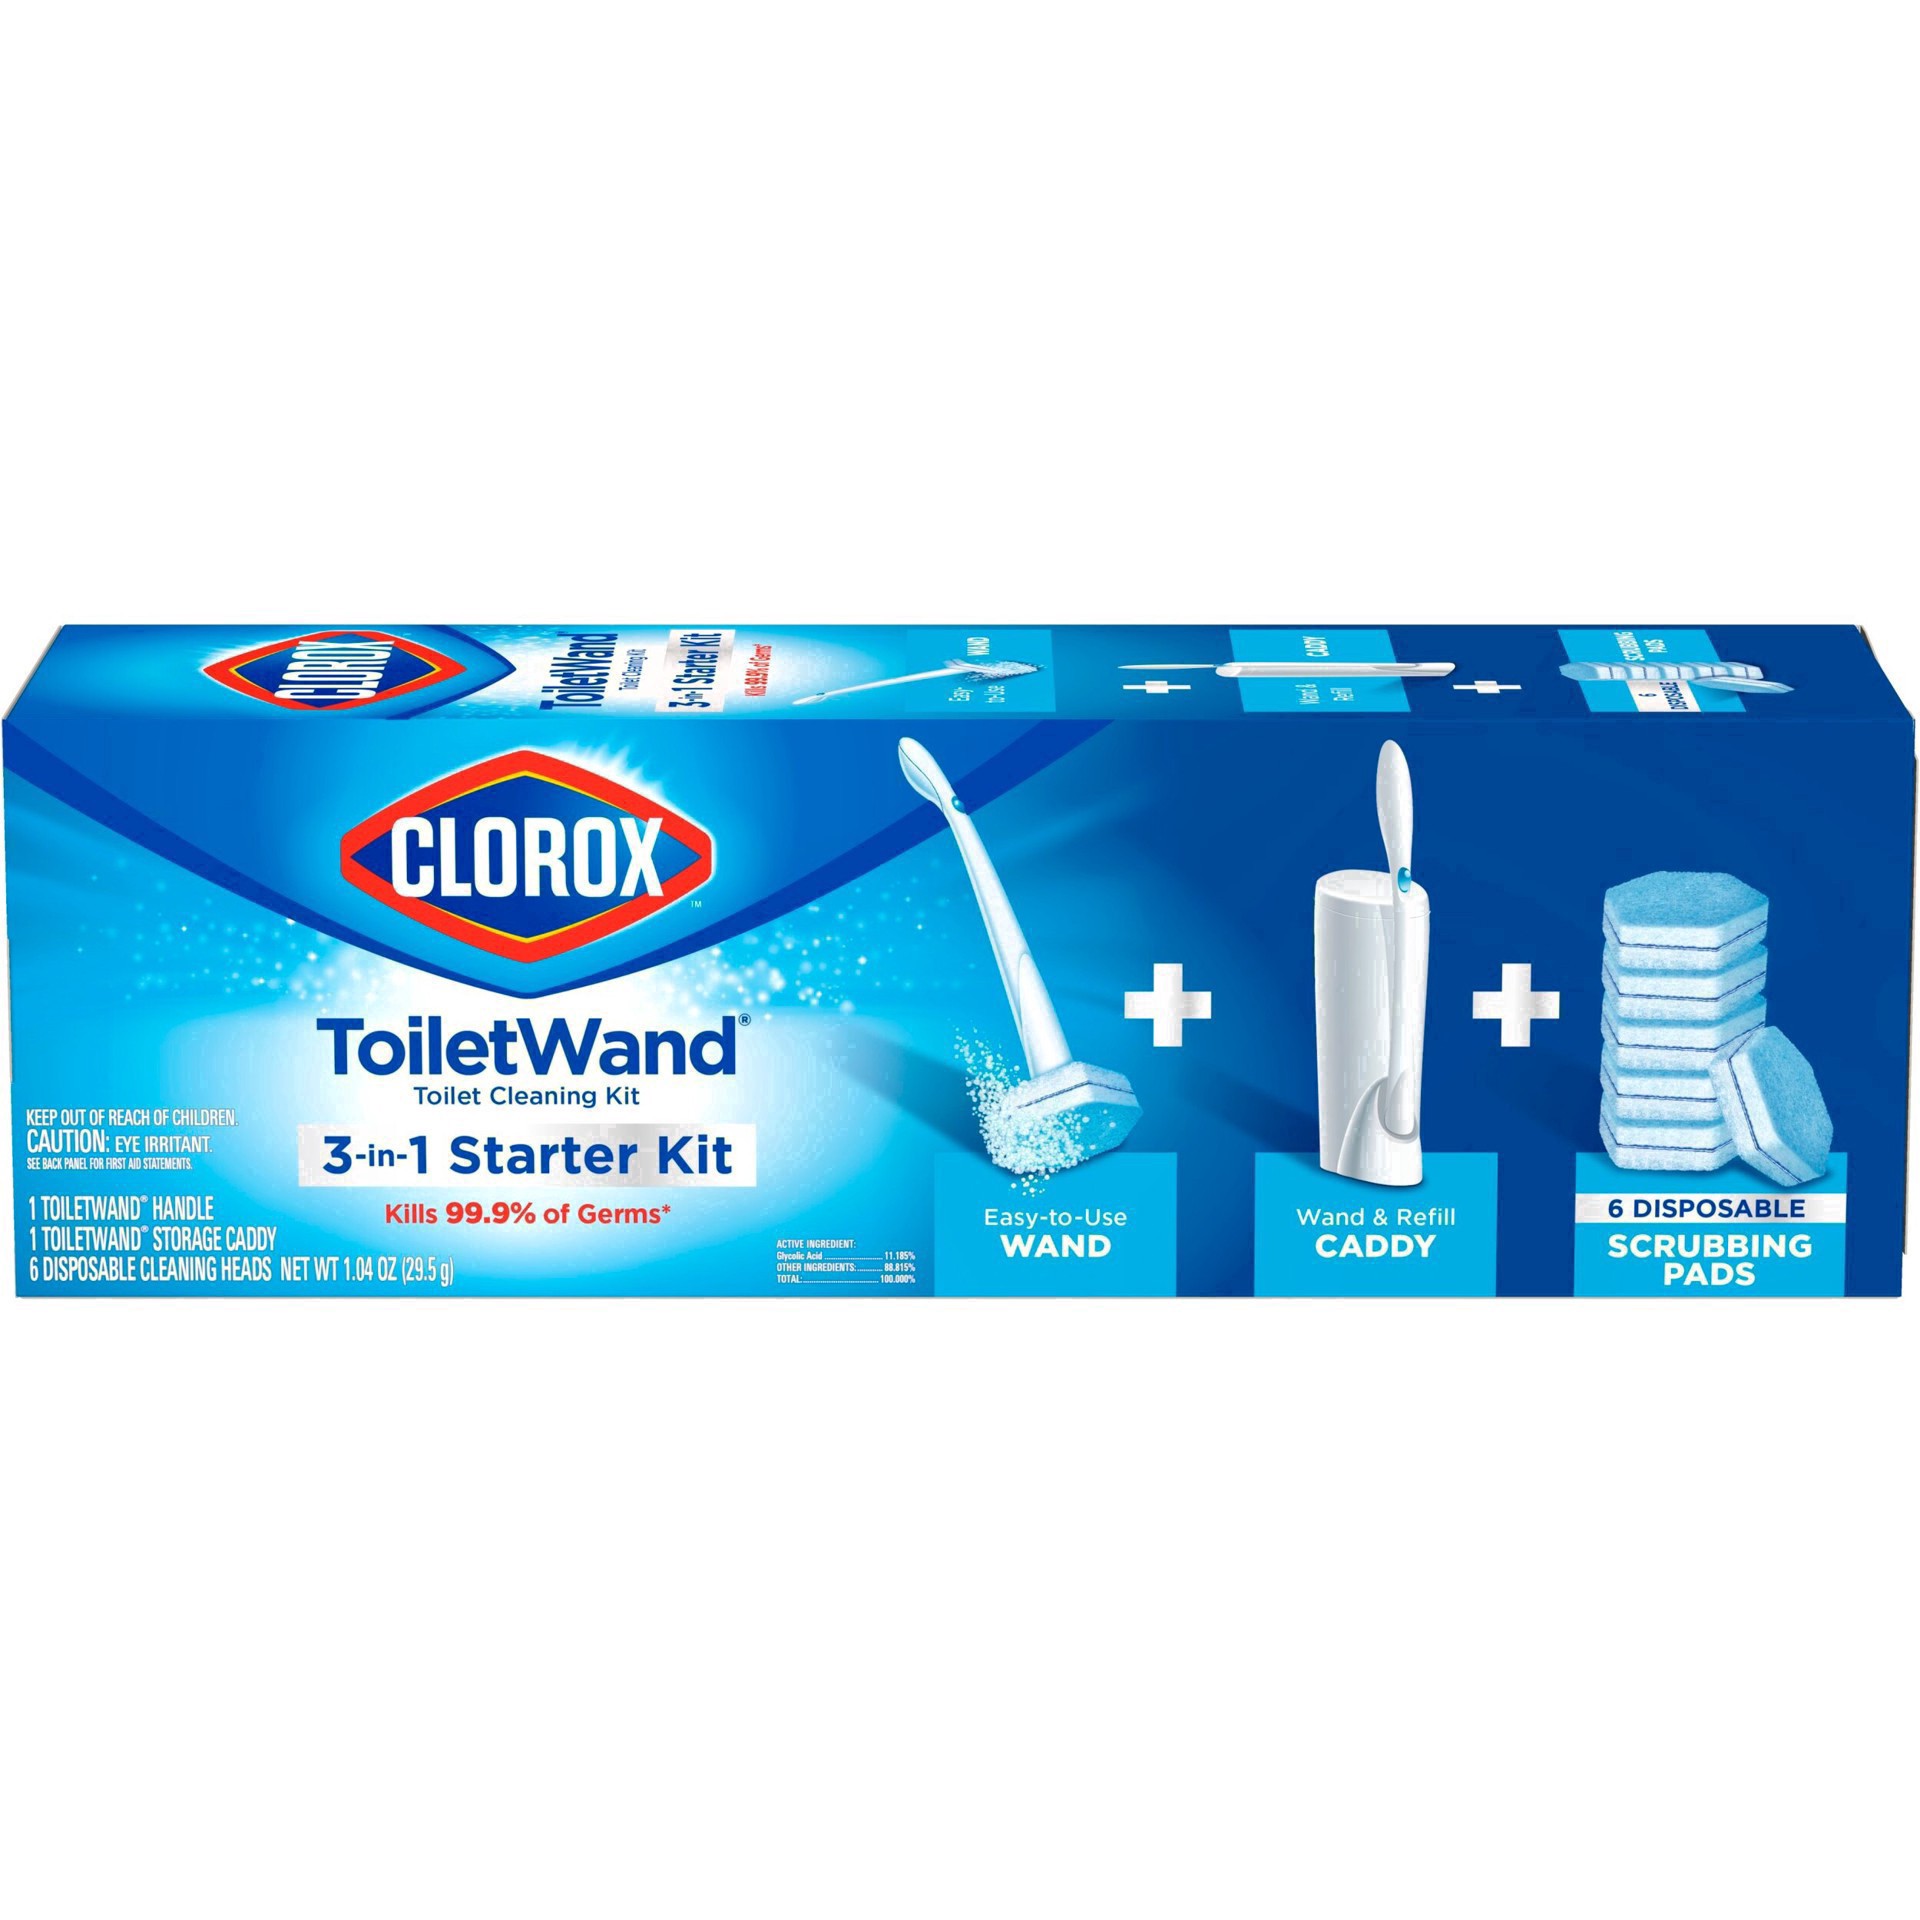 slide 120 of 176, Clorox Toilet Wand 3-in-1 Starter Toliet Cleaning Kit, 1 ct